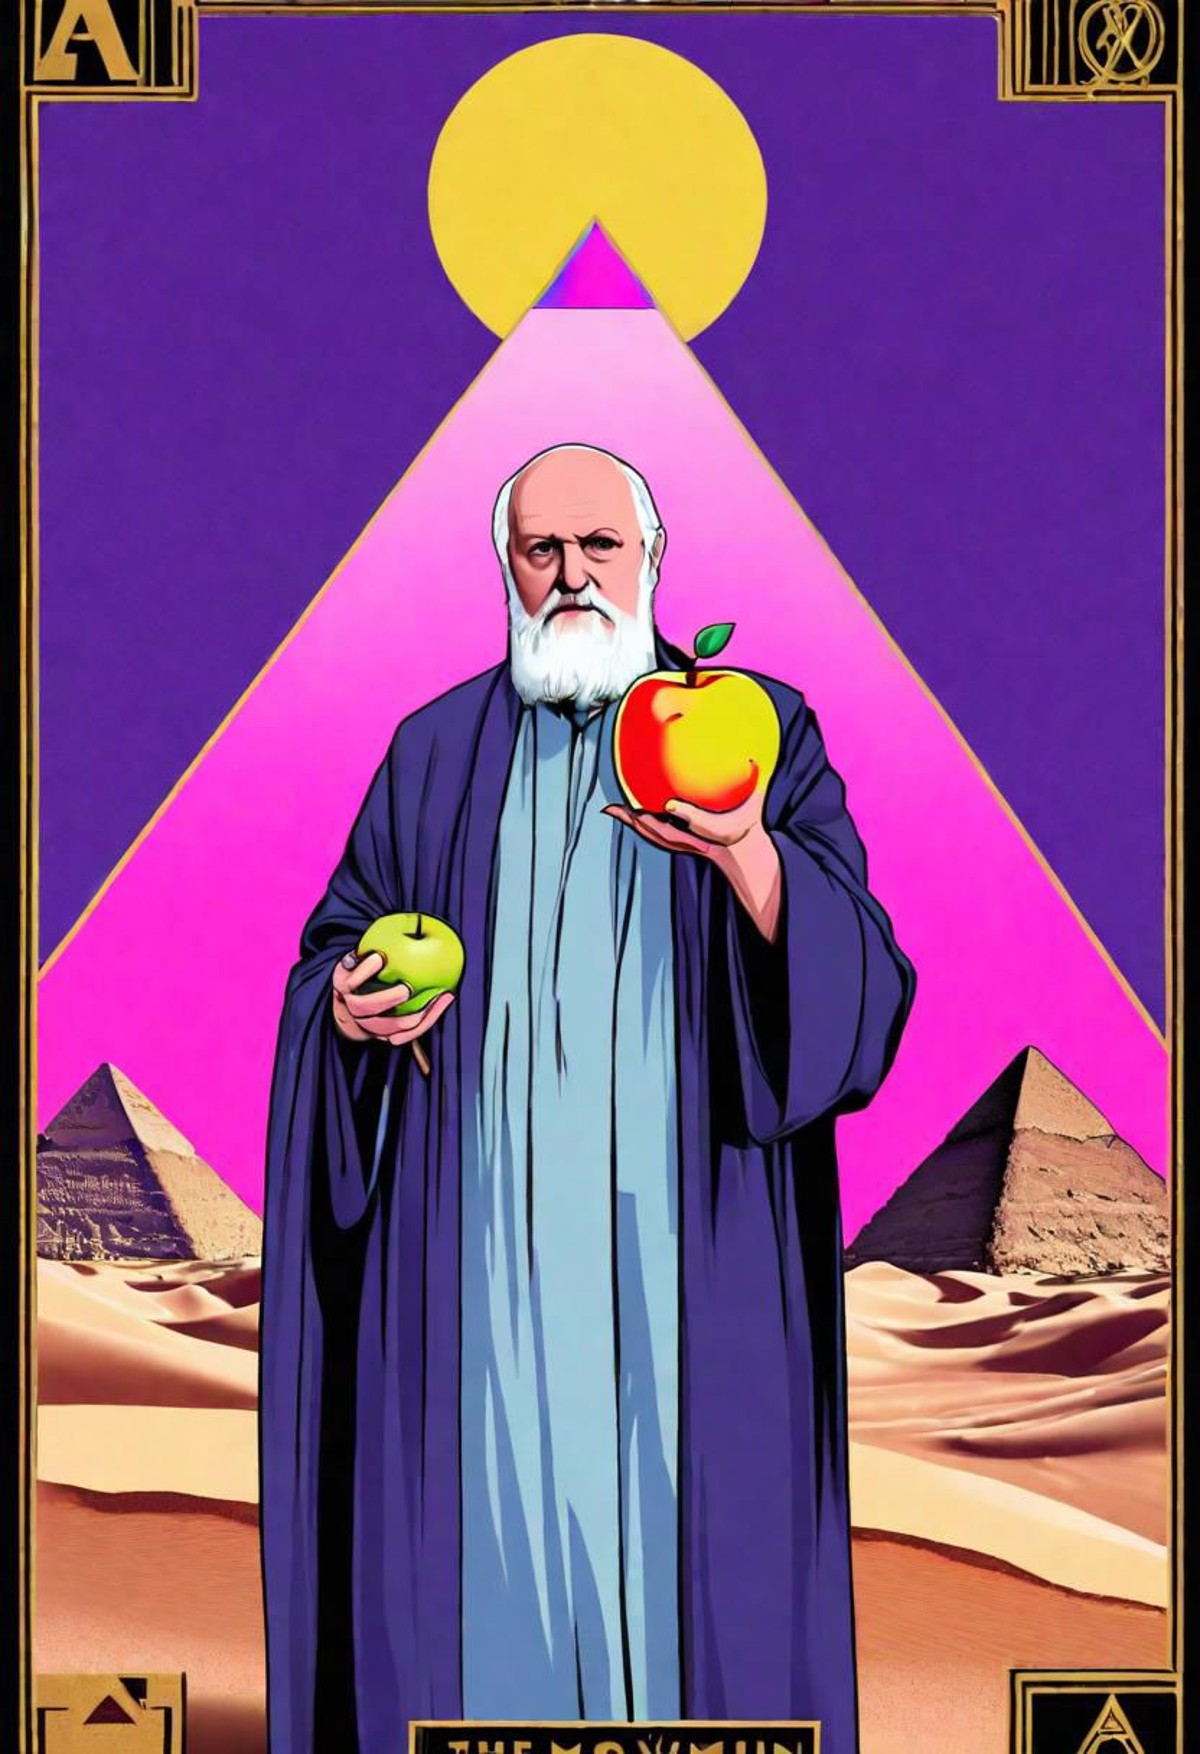 Tarot card design for the magician card with Robert Anton Wilson wearing wizard robes holding a magic wand in one hand and...